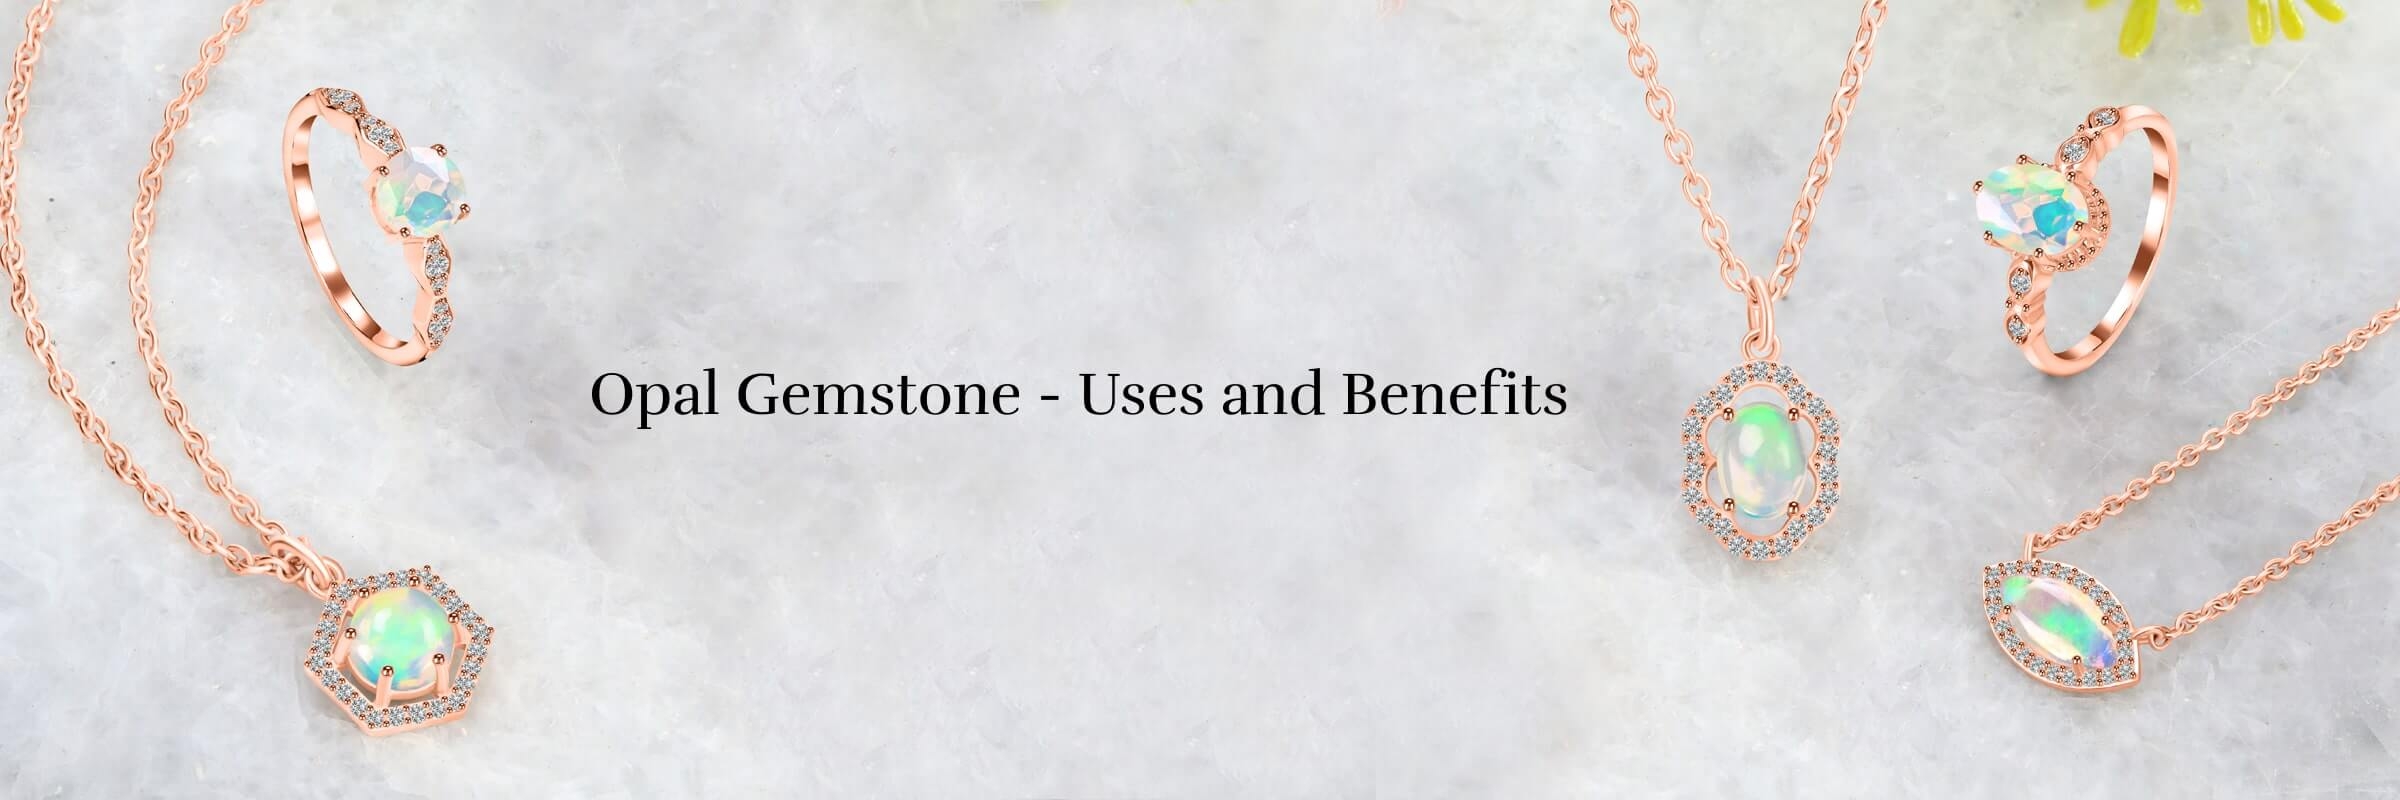 Benefit and uses Of Opal Gemstone